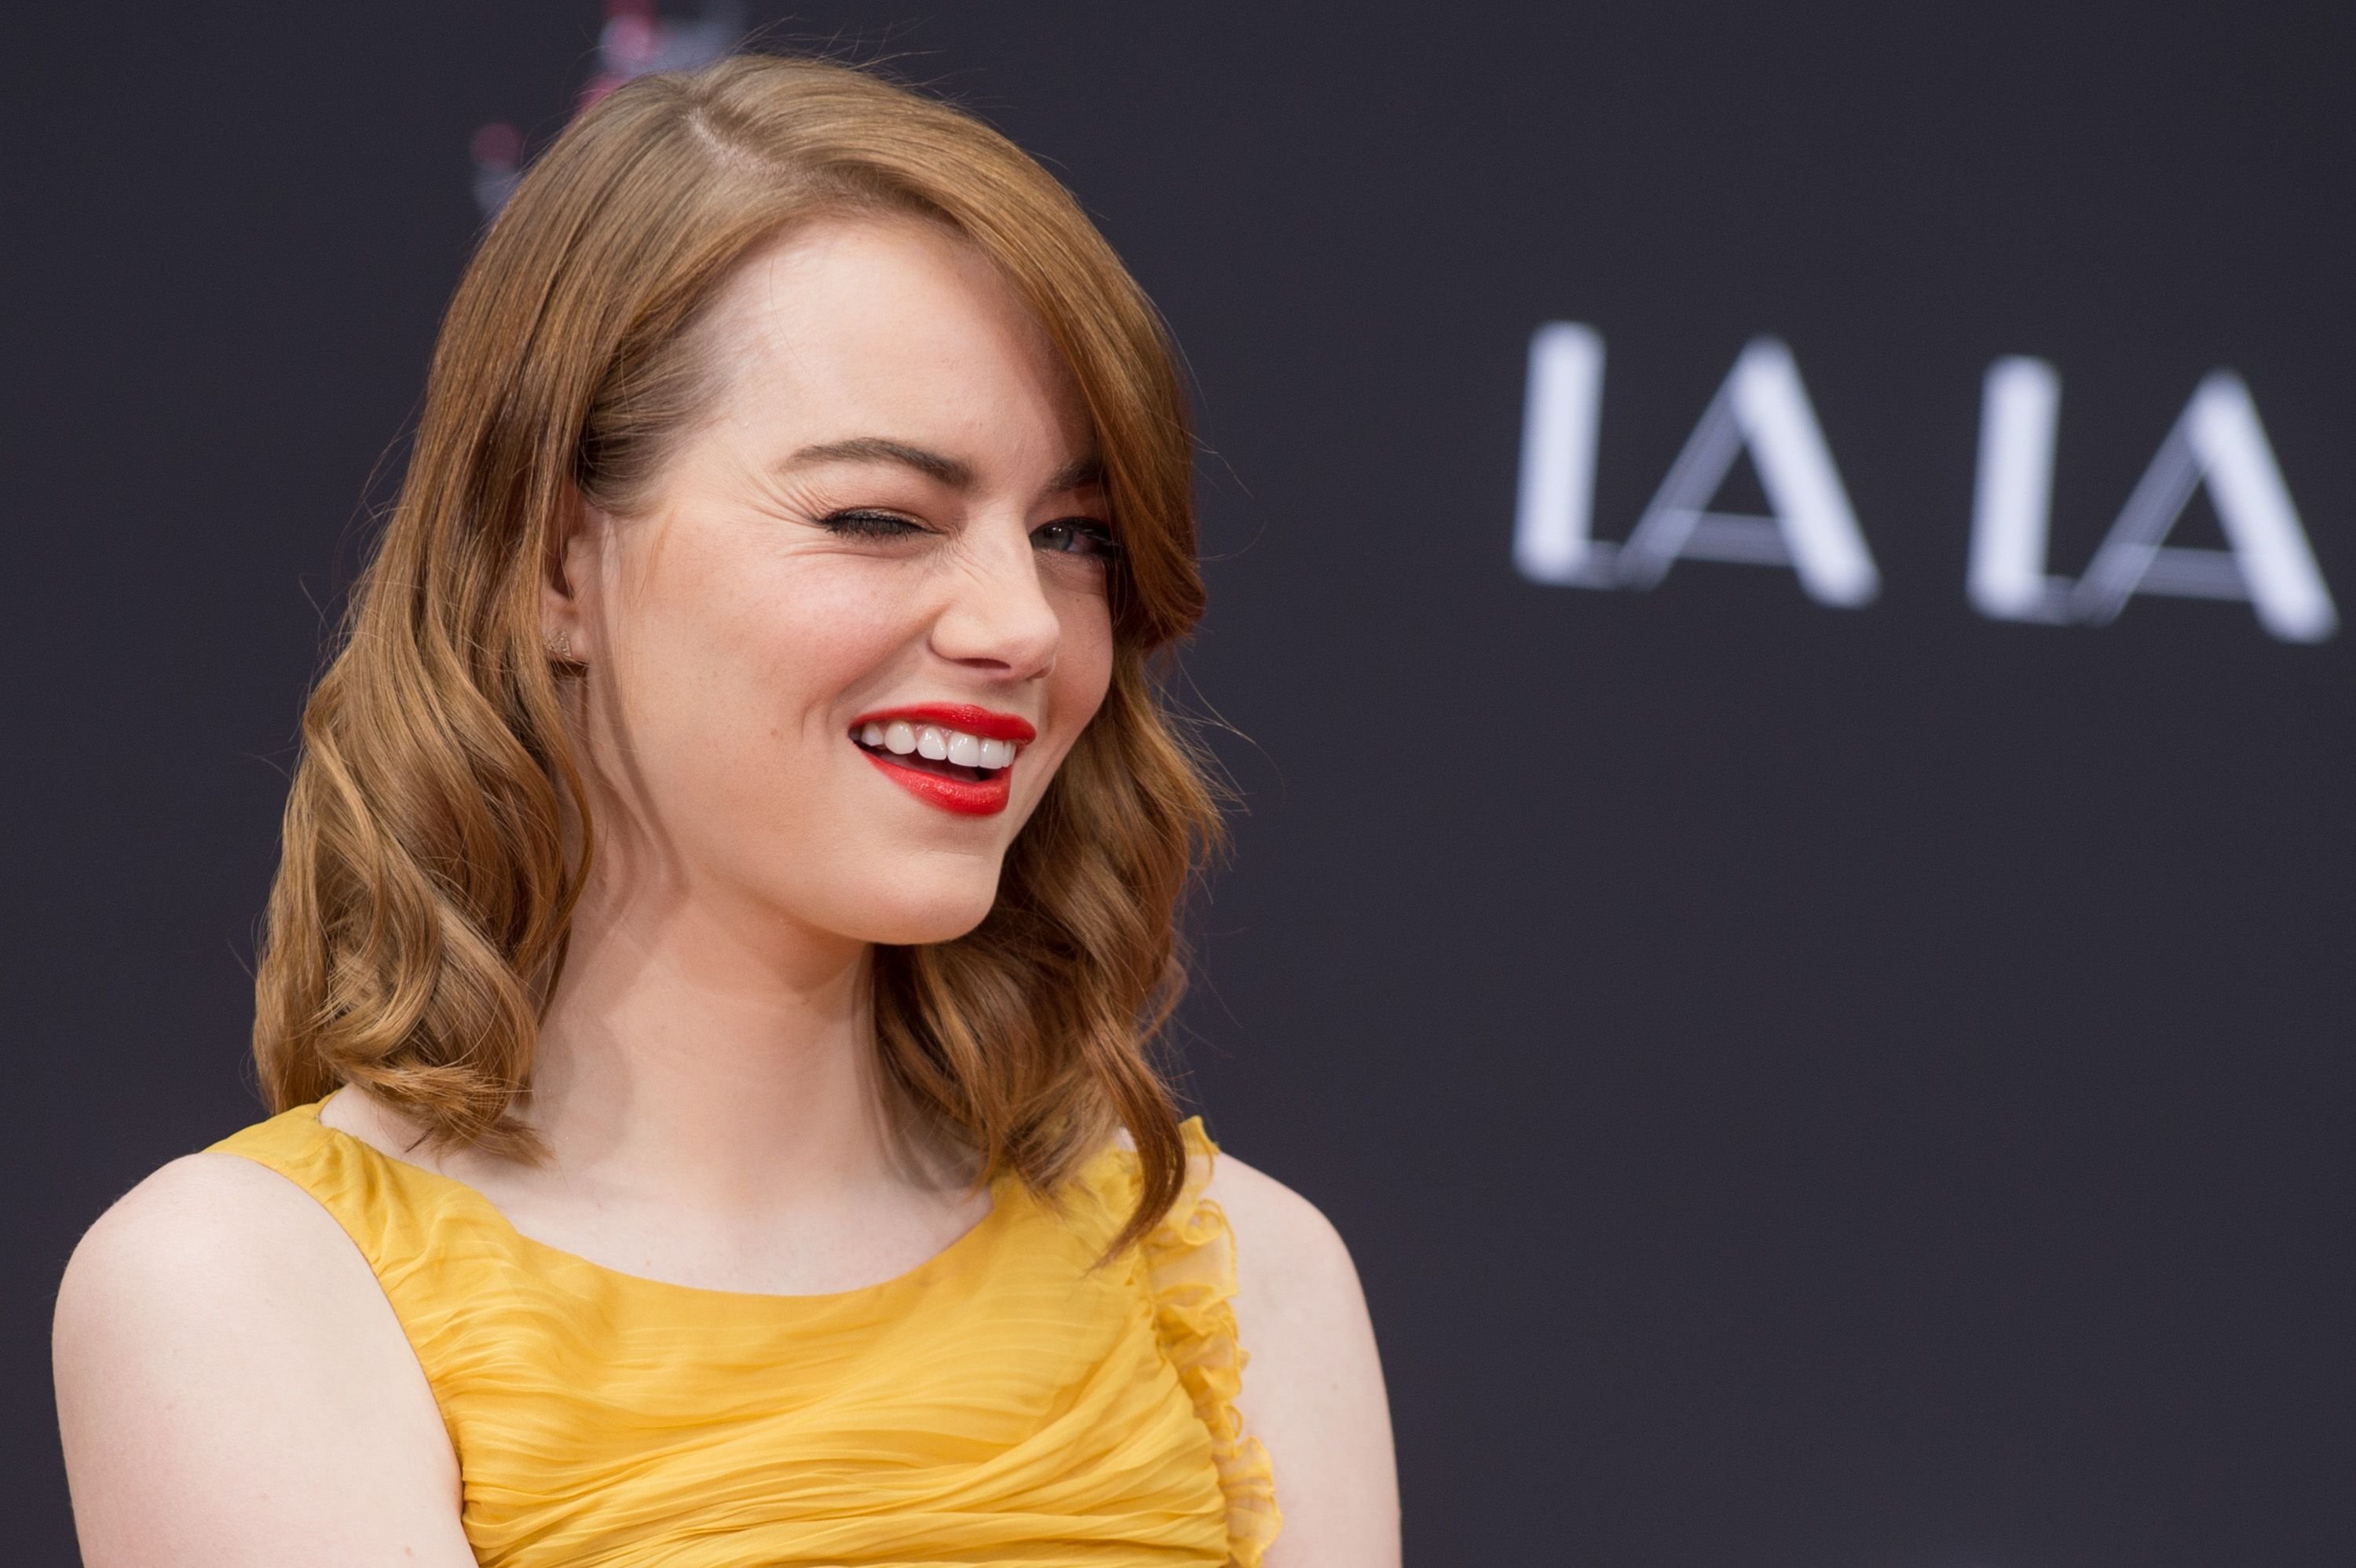 Emma Stone during the Ryan Gosling and Emma Stone hand and footprint ceremony at TCL Chinese Theatre IMAX on December 7, 2016 in Hollywood, California. | Source: Getty Images